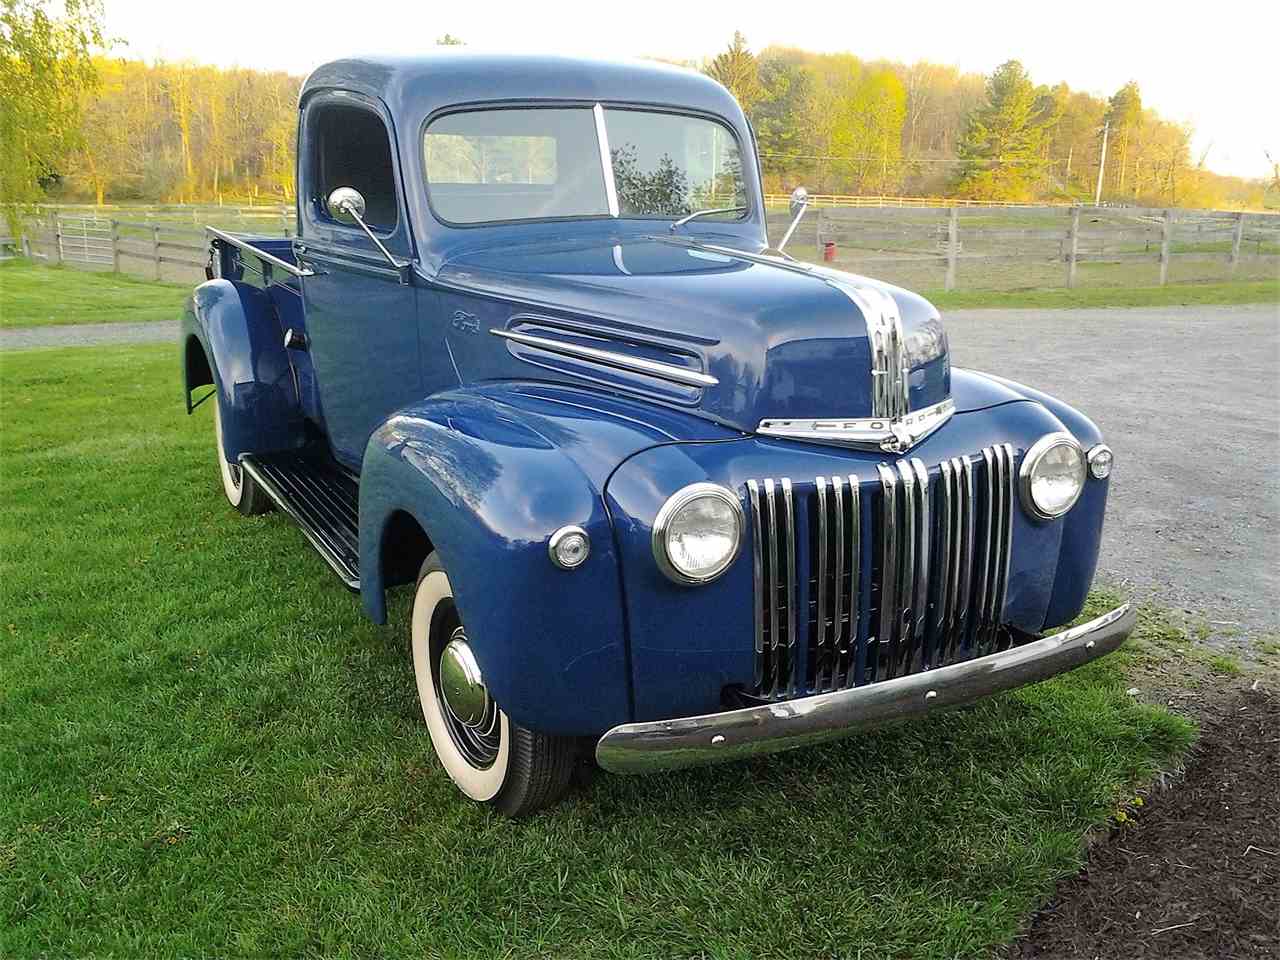 1946 Ford Pickup for Sale  ClassicCars.com  CC988989